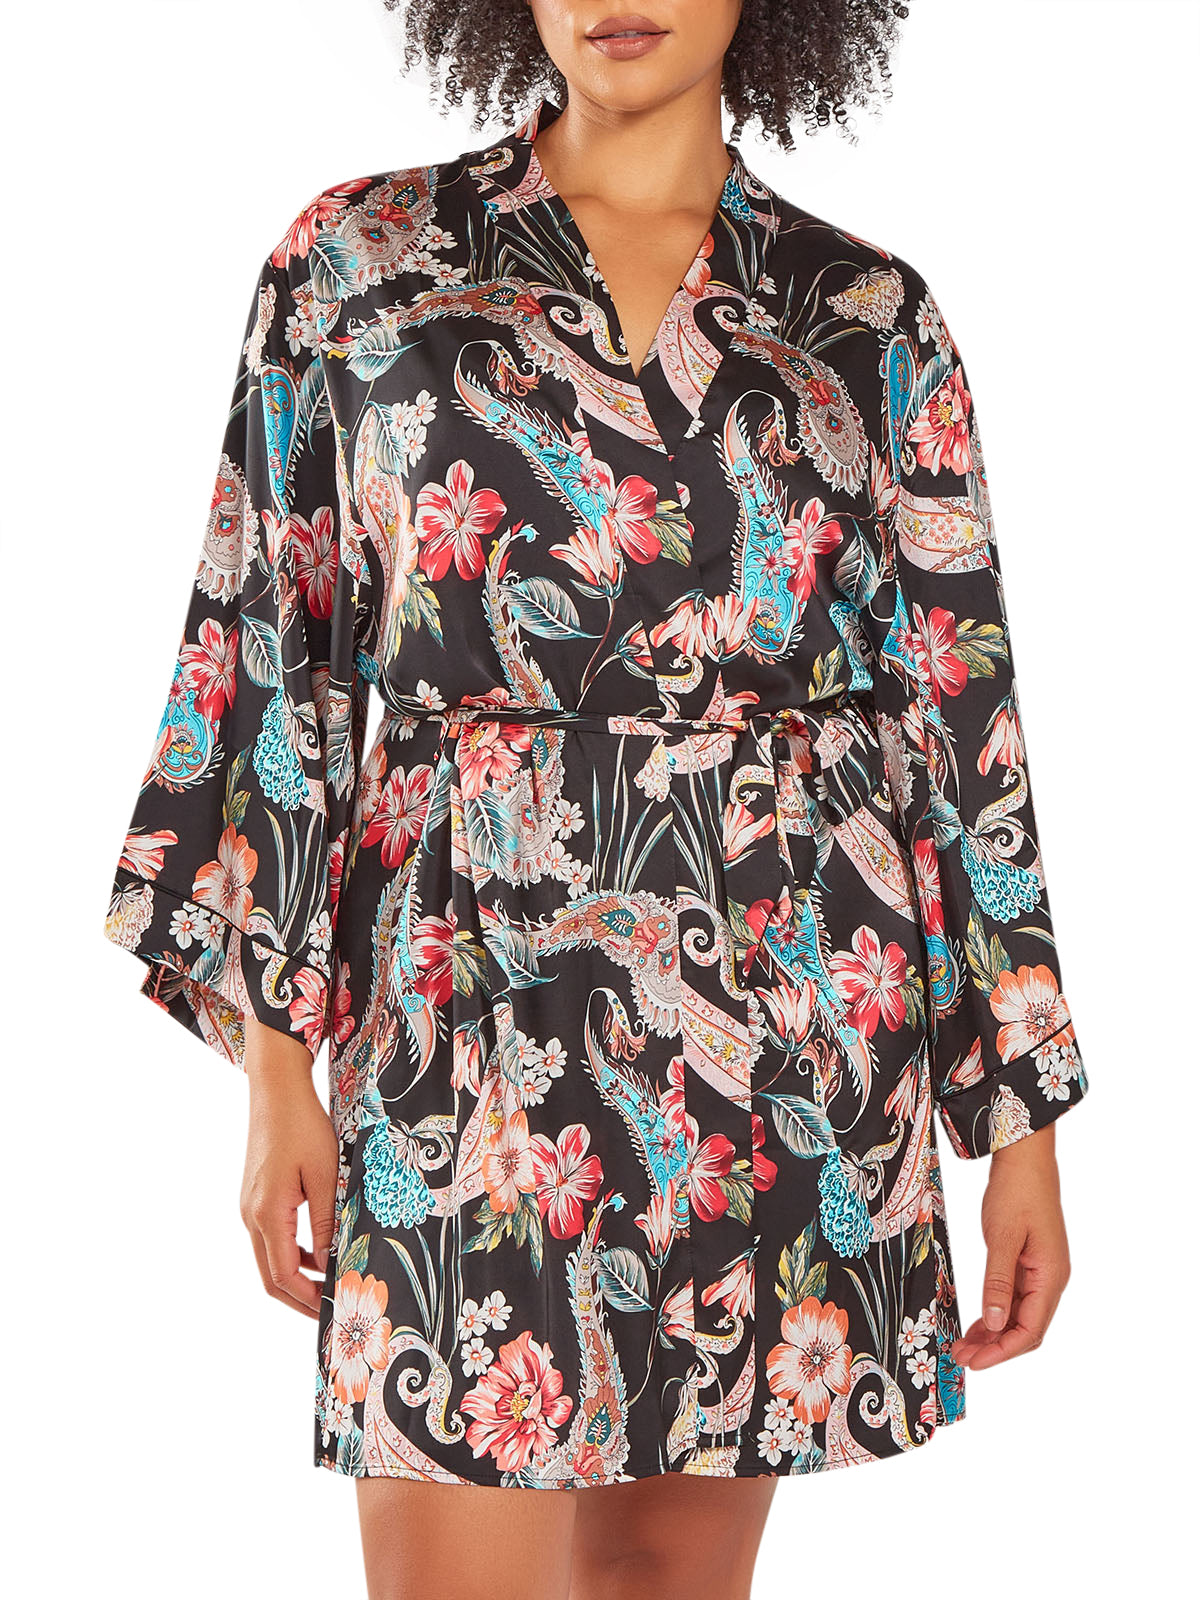 iCollection Robe Taylor Plus Size Robe